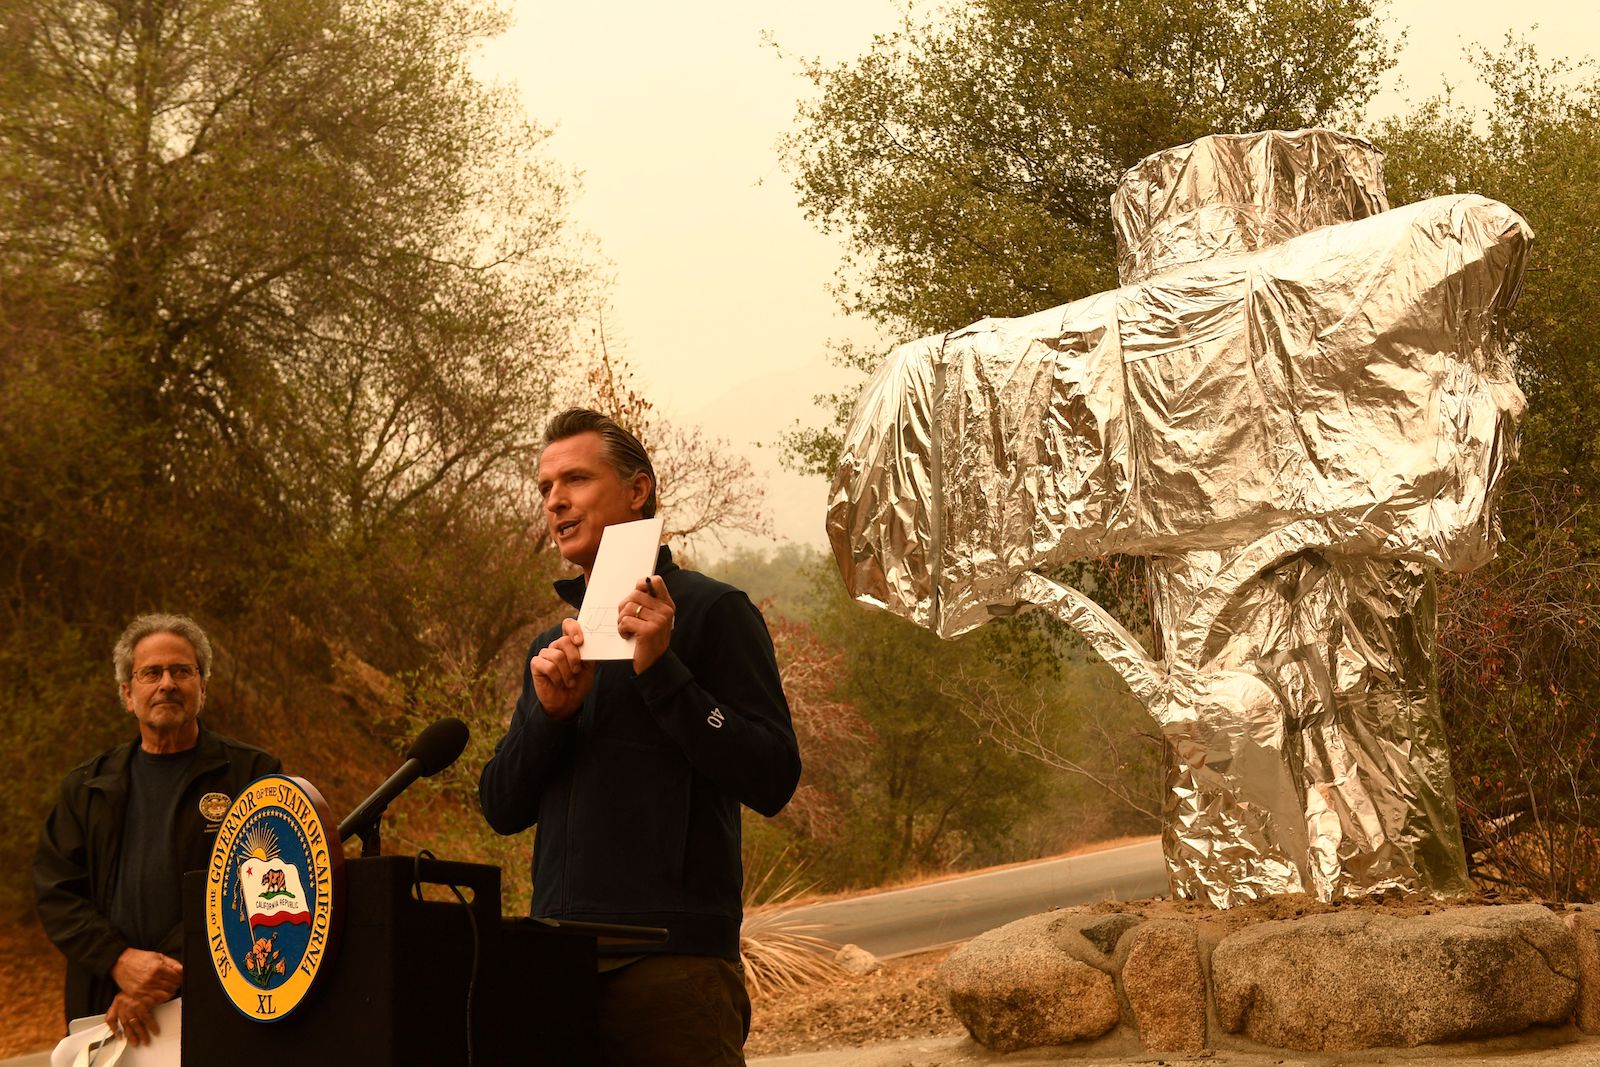 Gavin newsom holds white piece of paper while standing in front of podium. In the background, a foil-wrapped structure and trees and orange sky